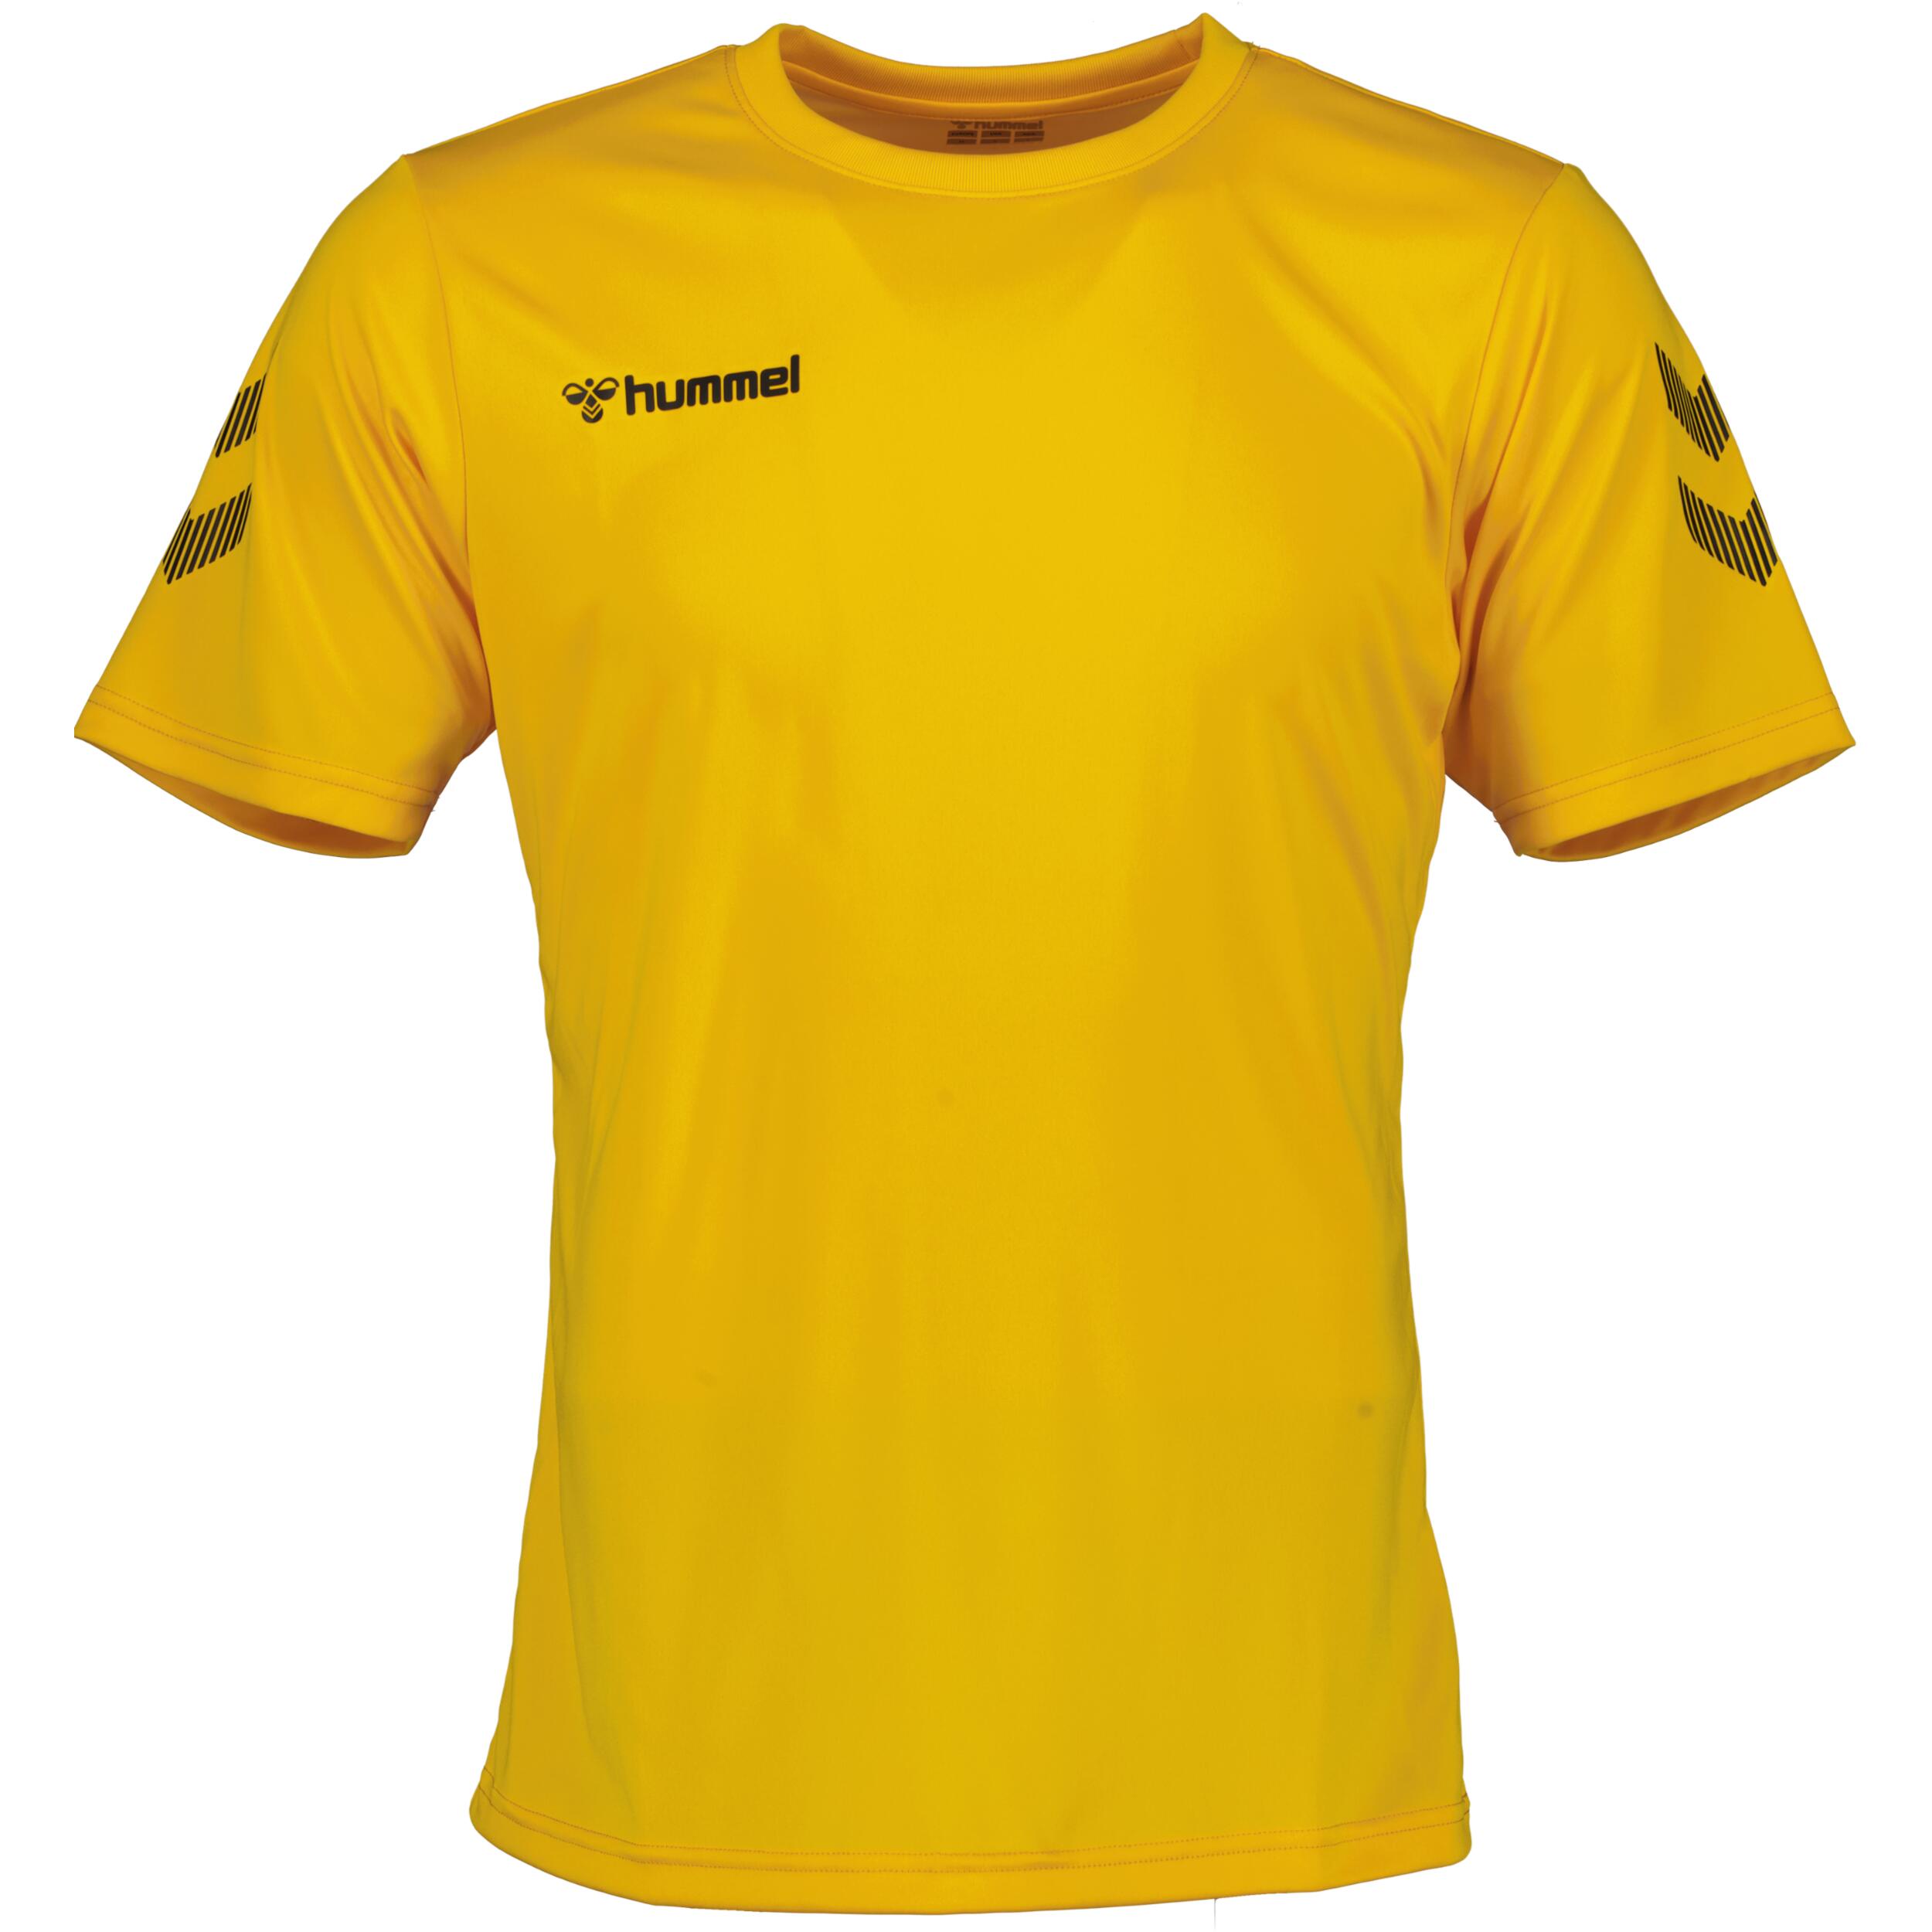 Solo jersey for men, great for football, in sports yellow 1/3